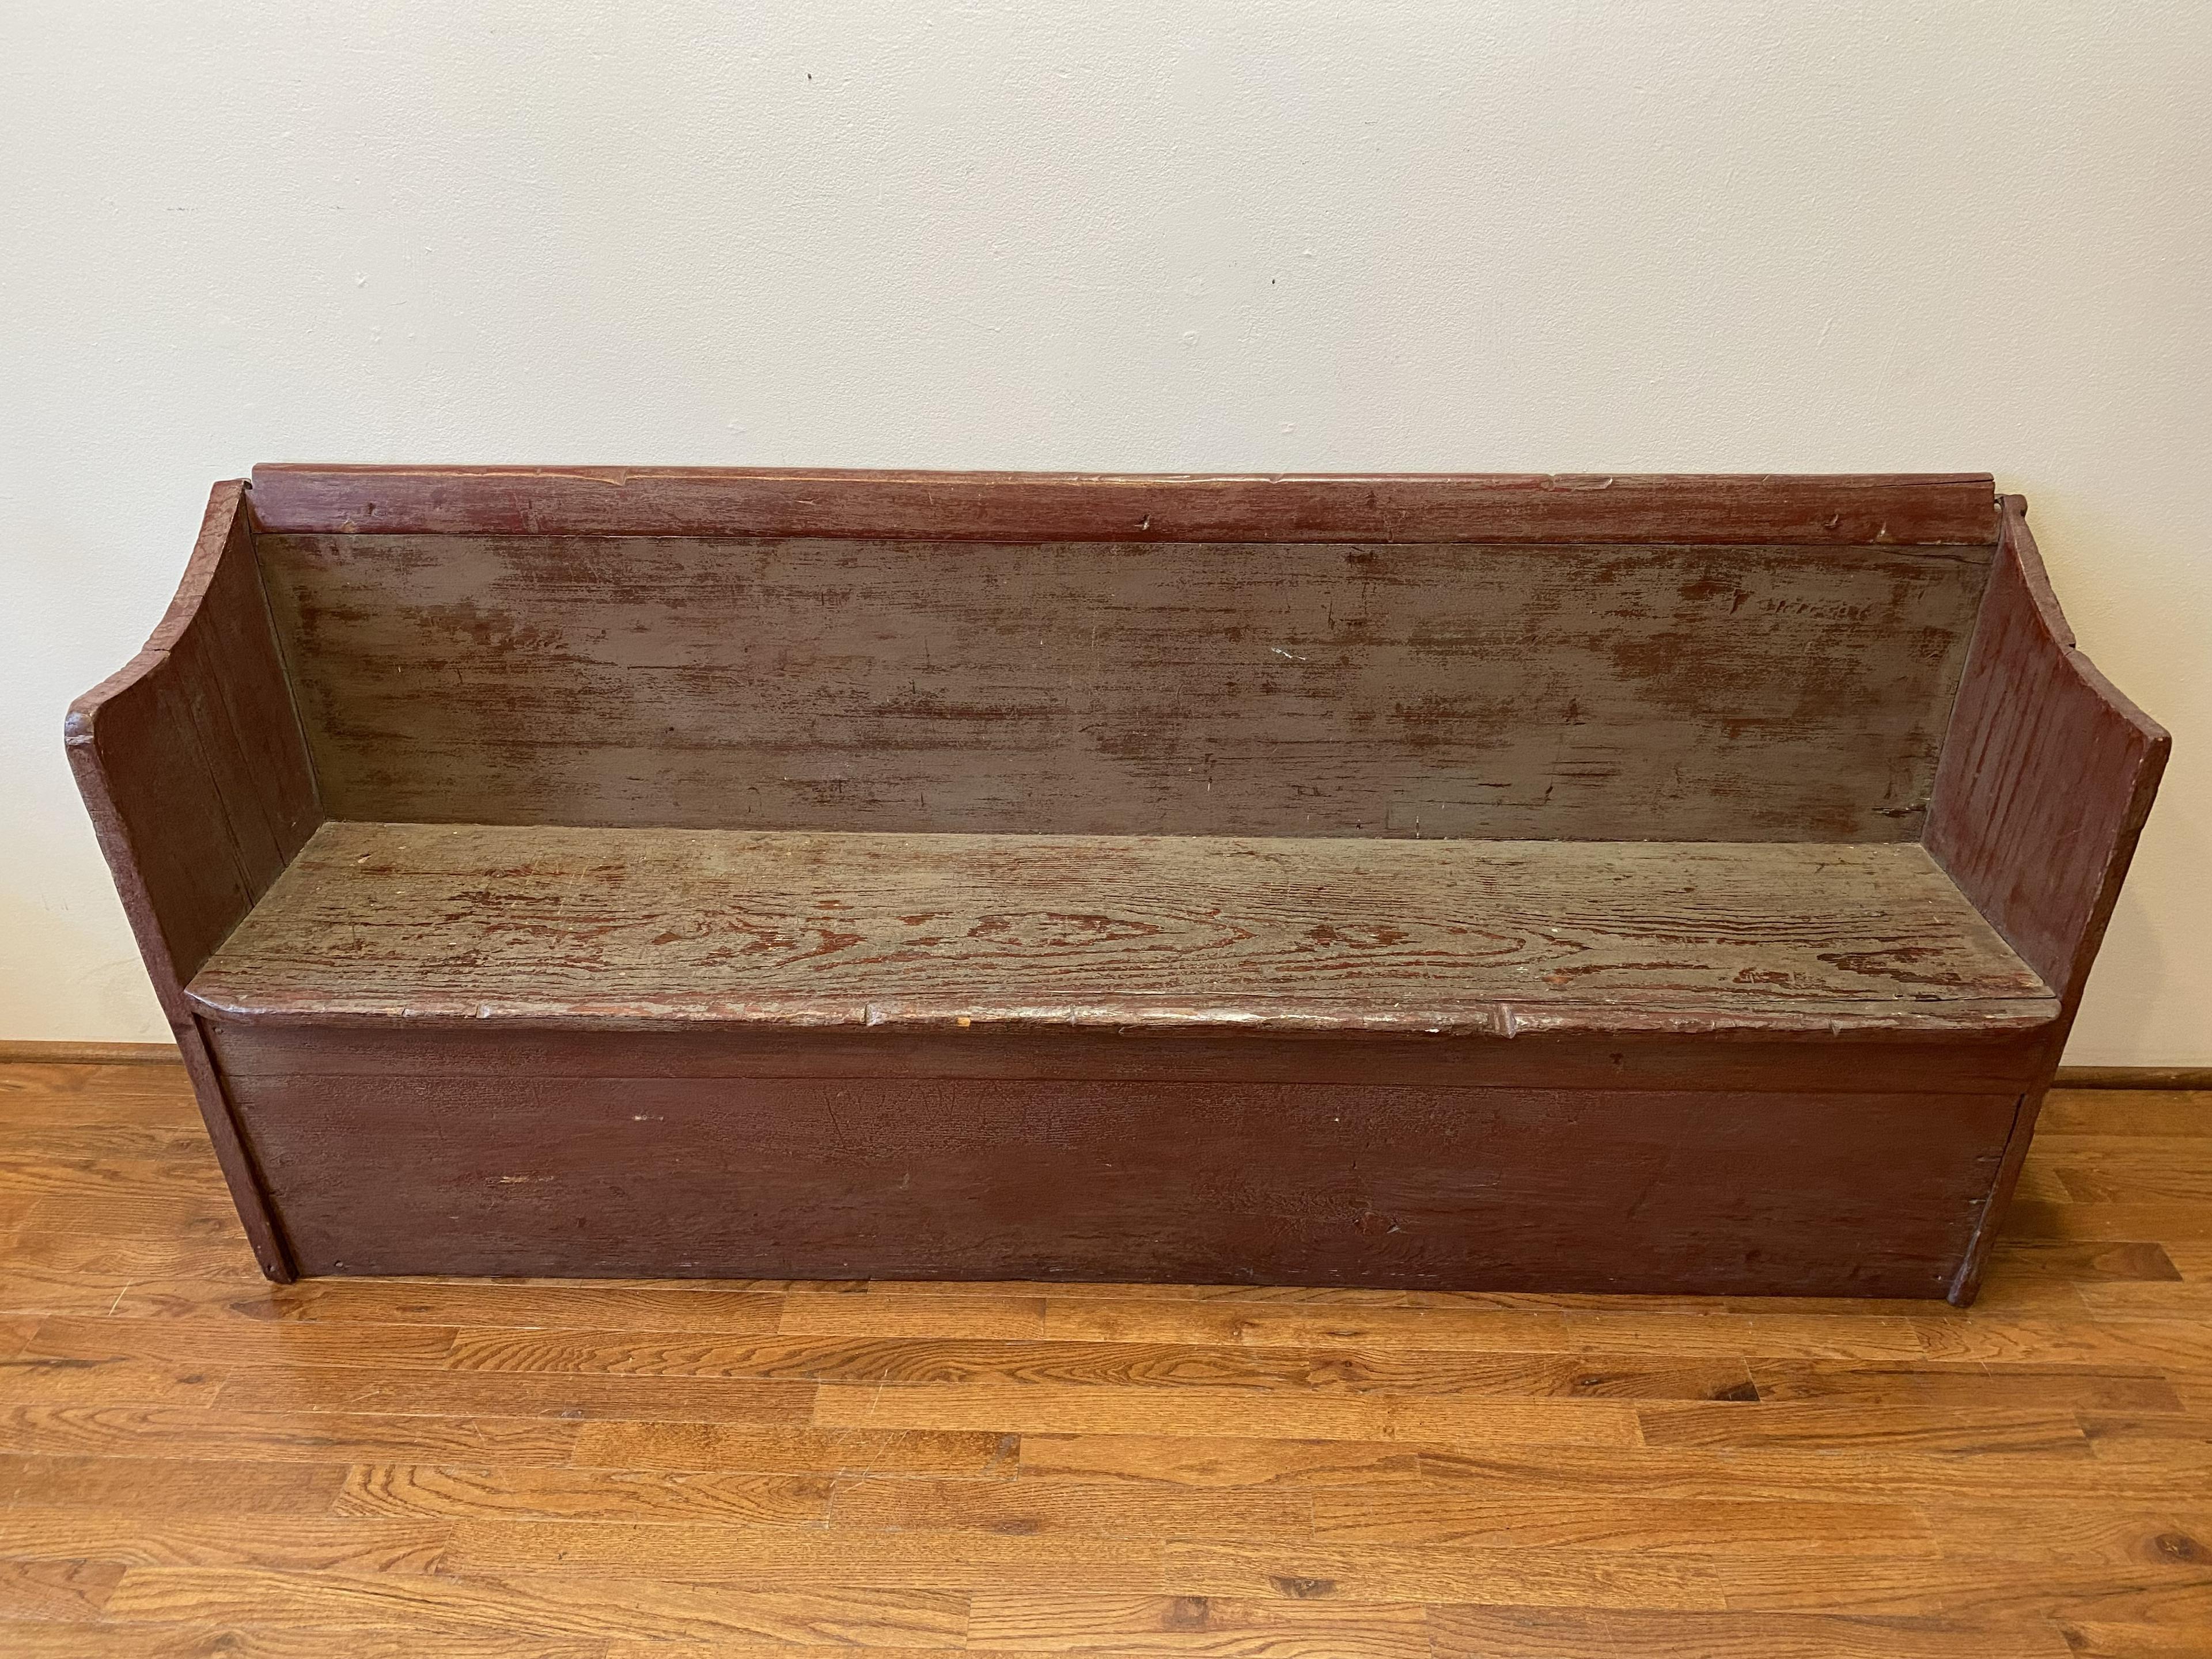 Red painted wood bench, early 1800s.